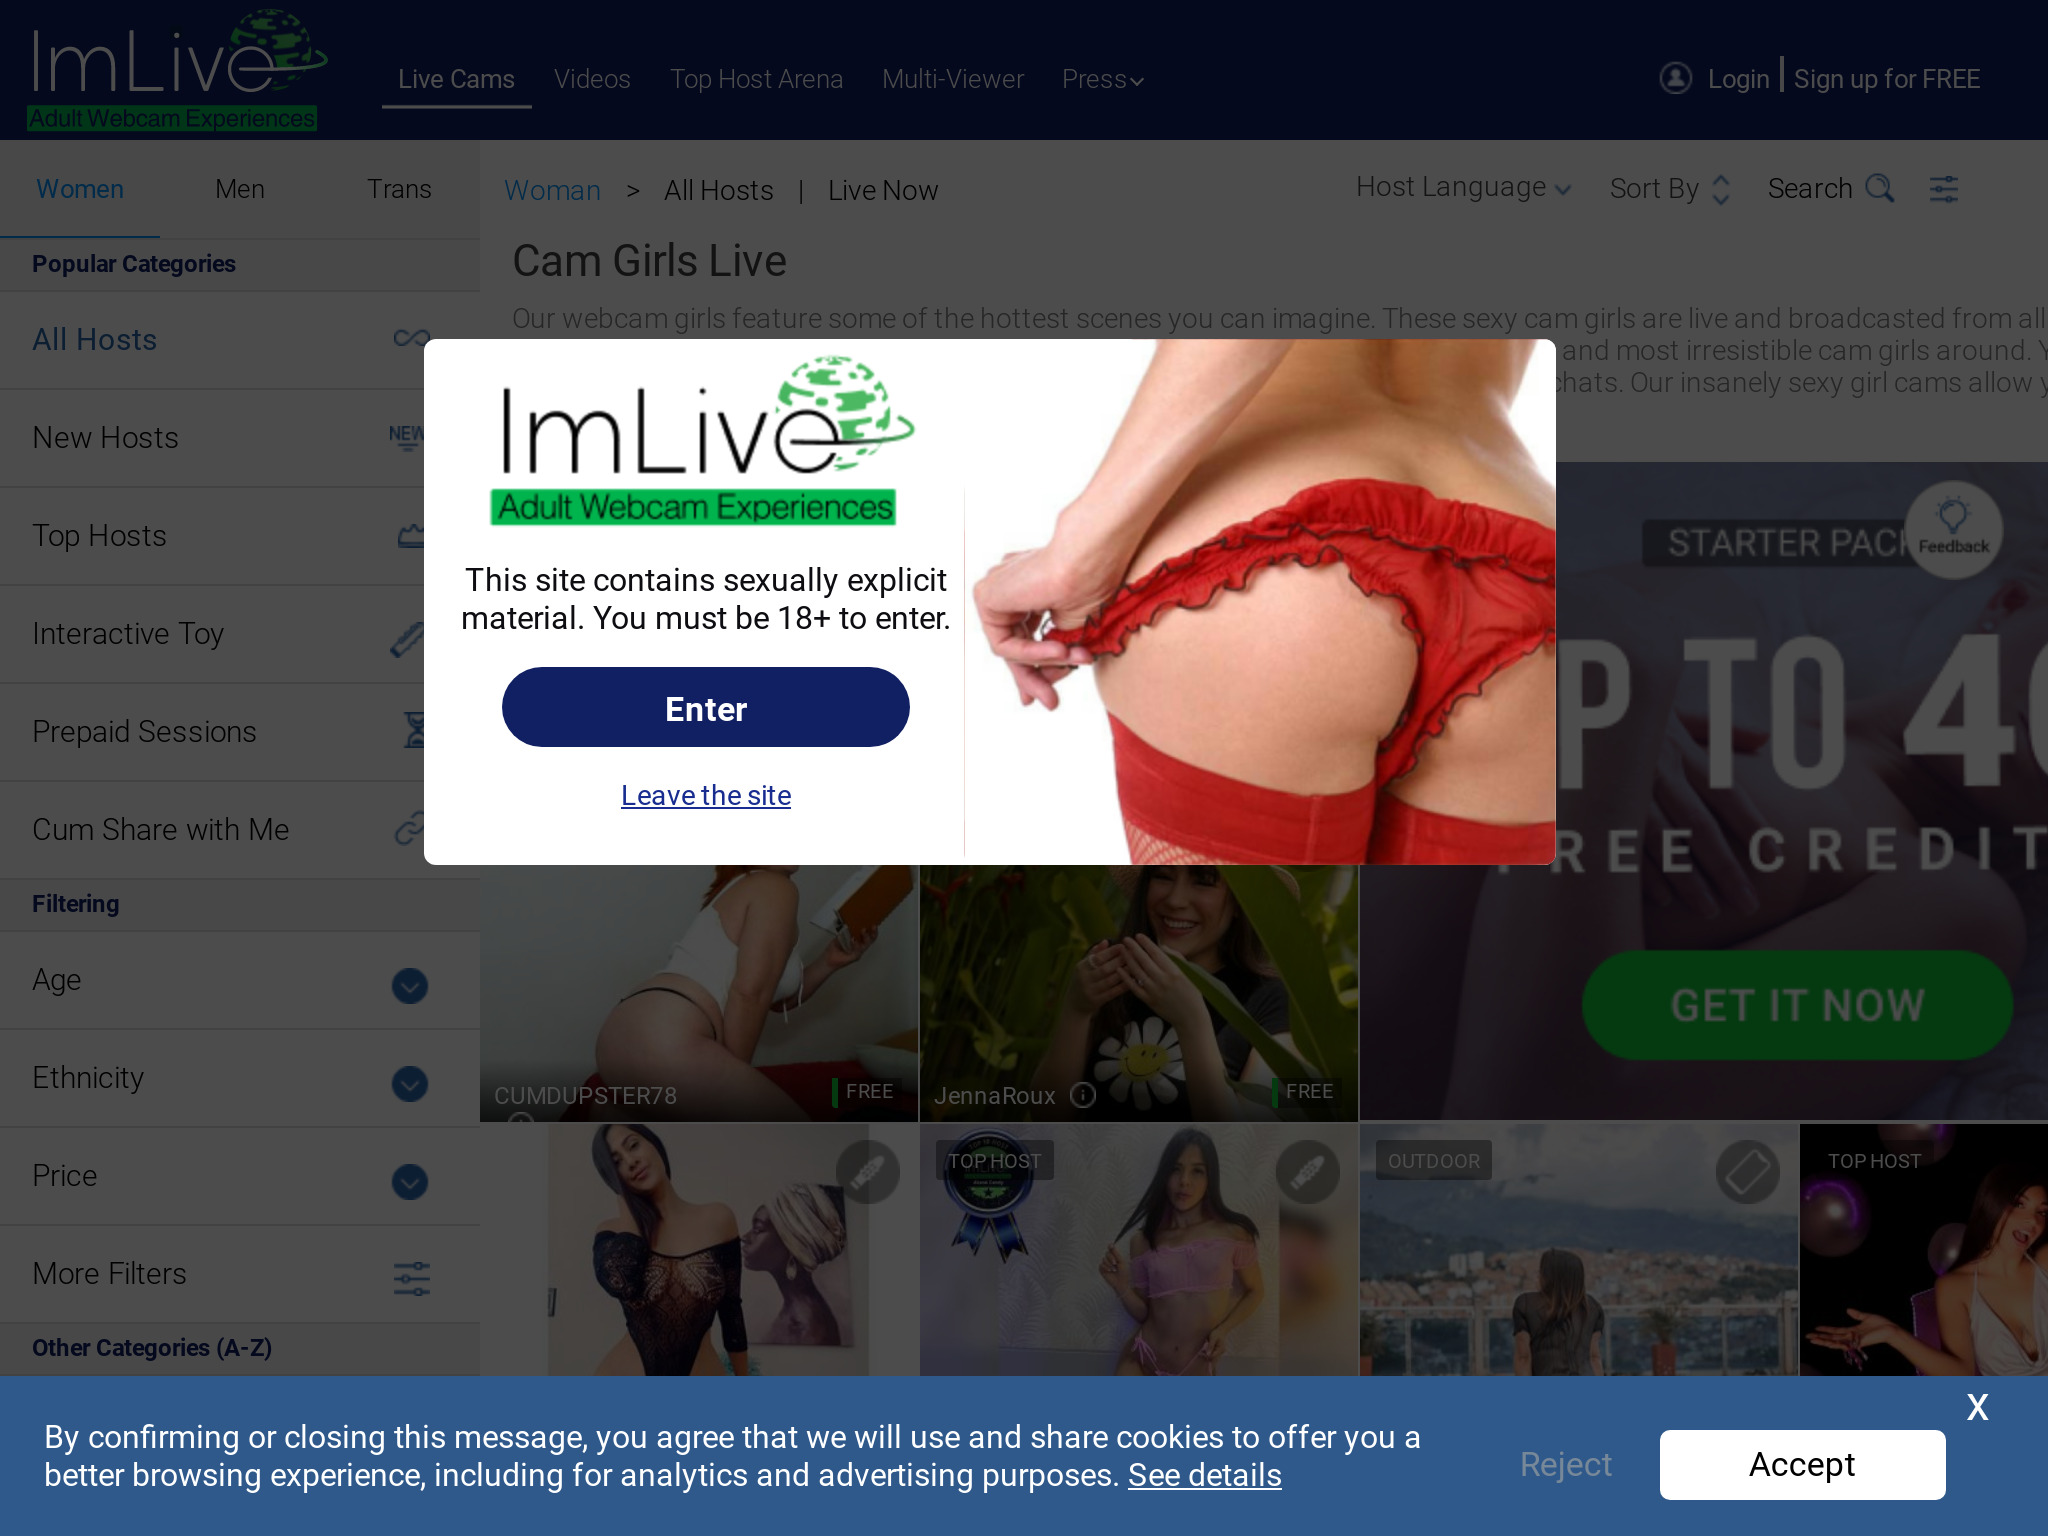 ImLive Review: Pros, Cons, and Everything In Between